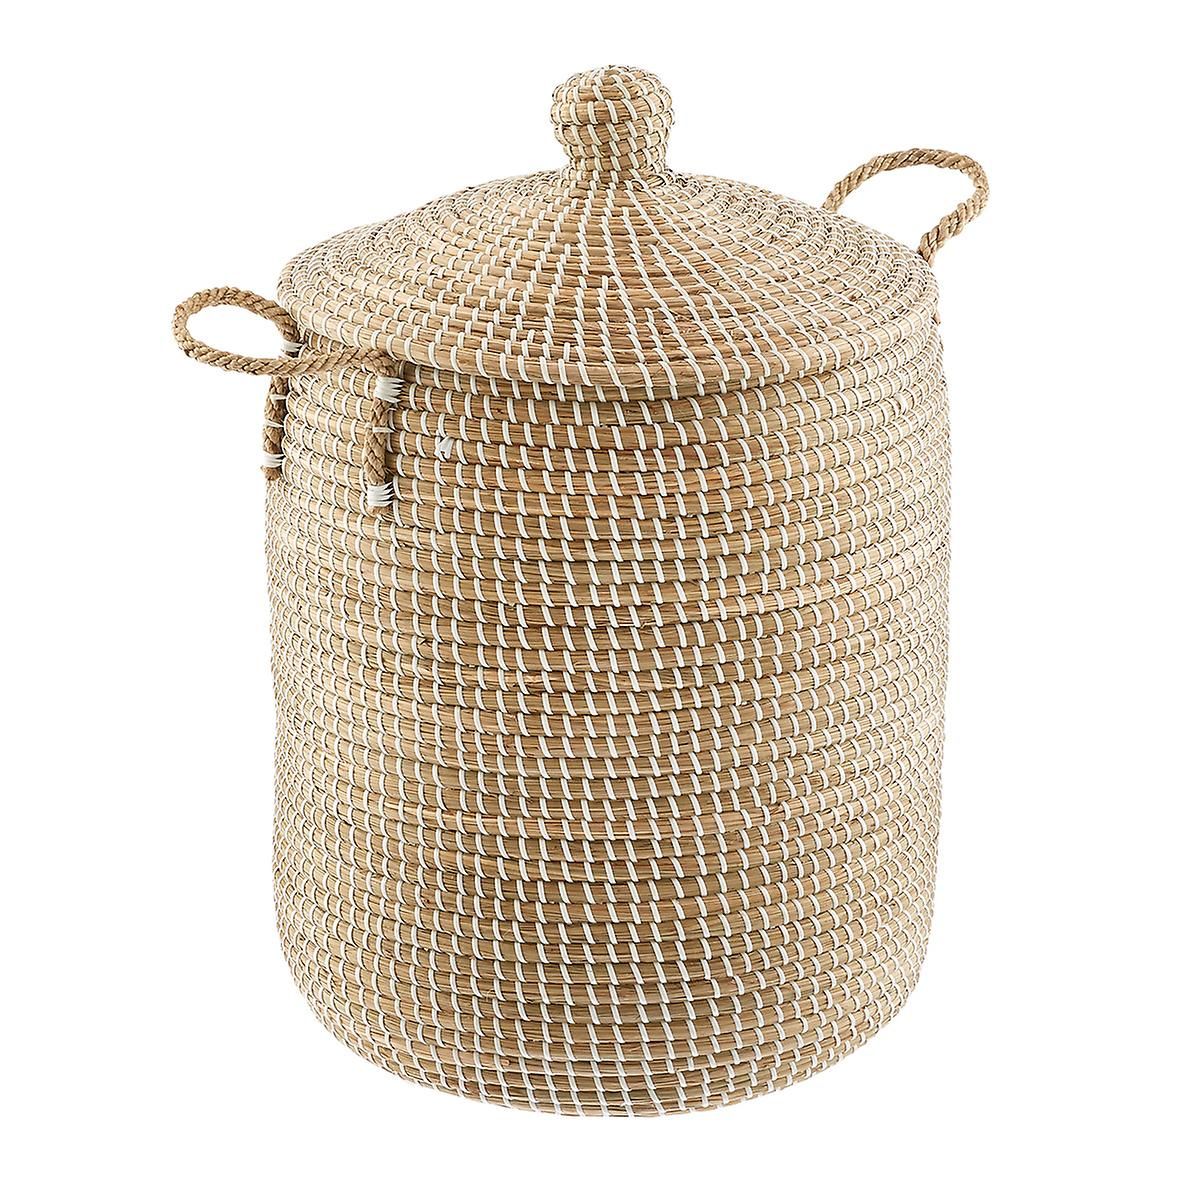 Replacement Round Tapered Seagrass Hamper Liner Natural | The Container Store